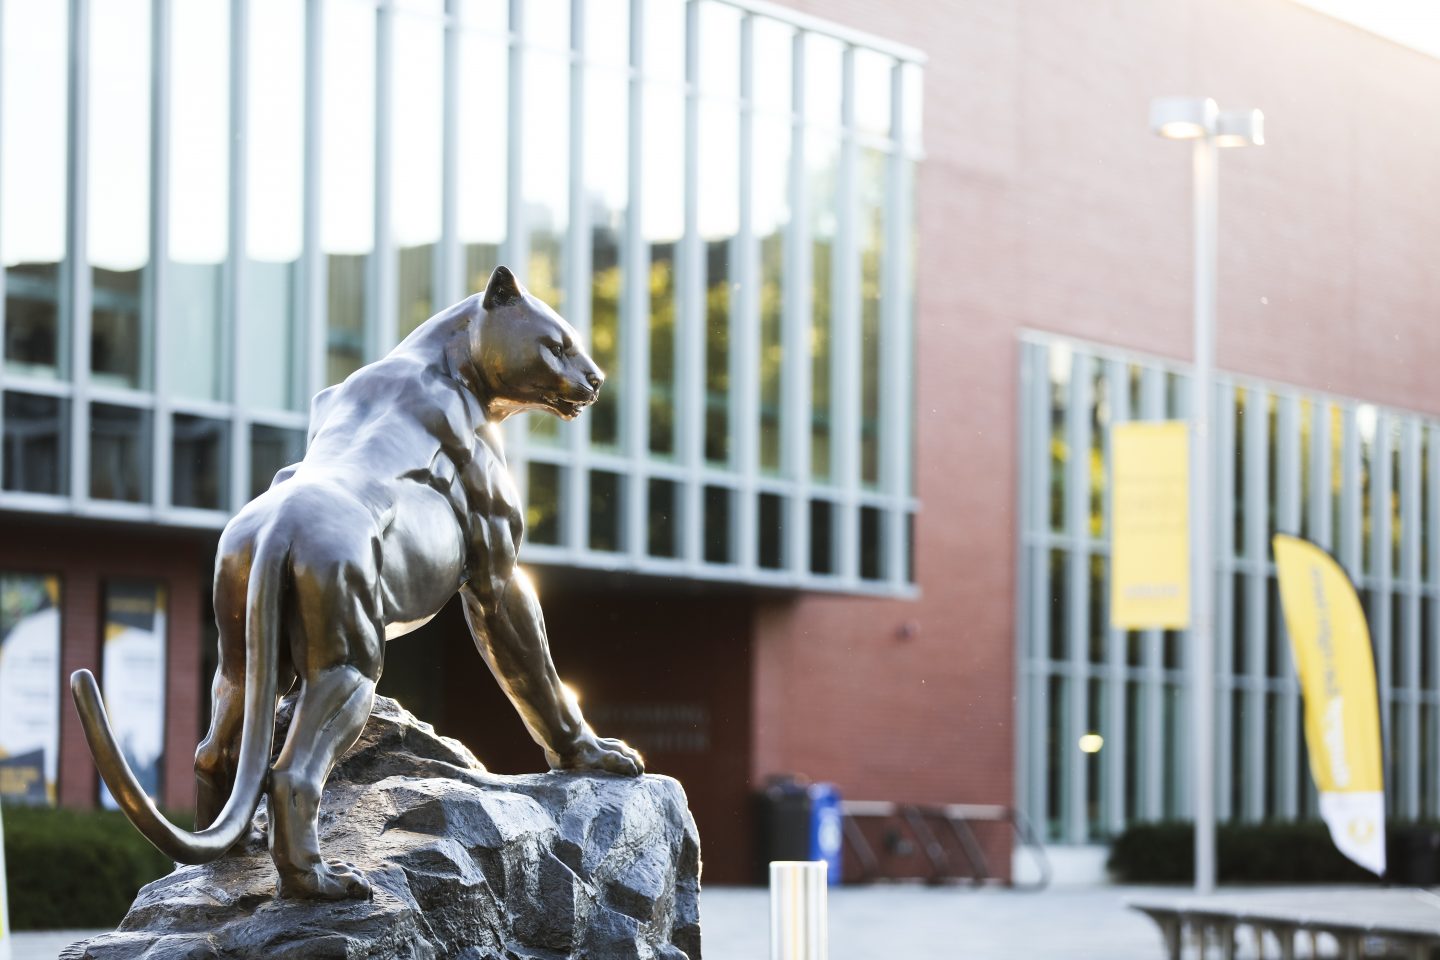 The bronze statue of Adelphi' Panther mascot in front of the Center for Recreation and Sports